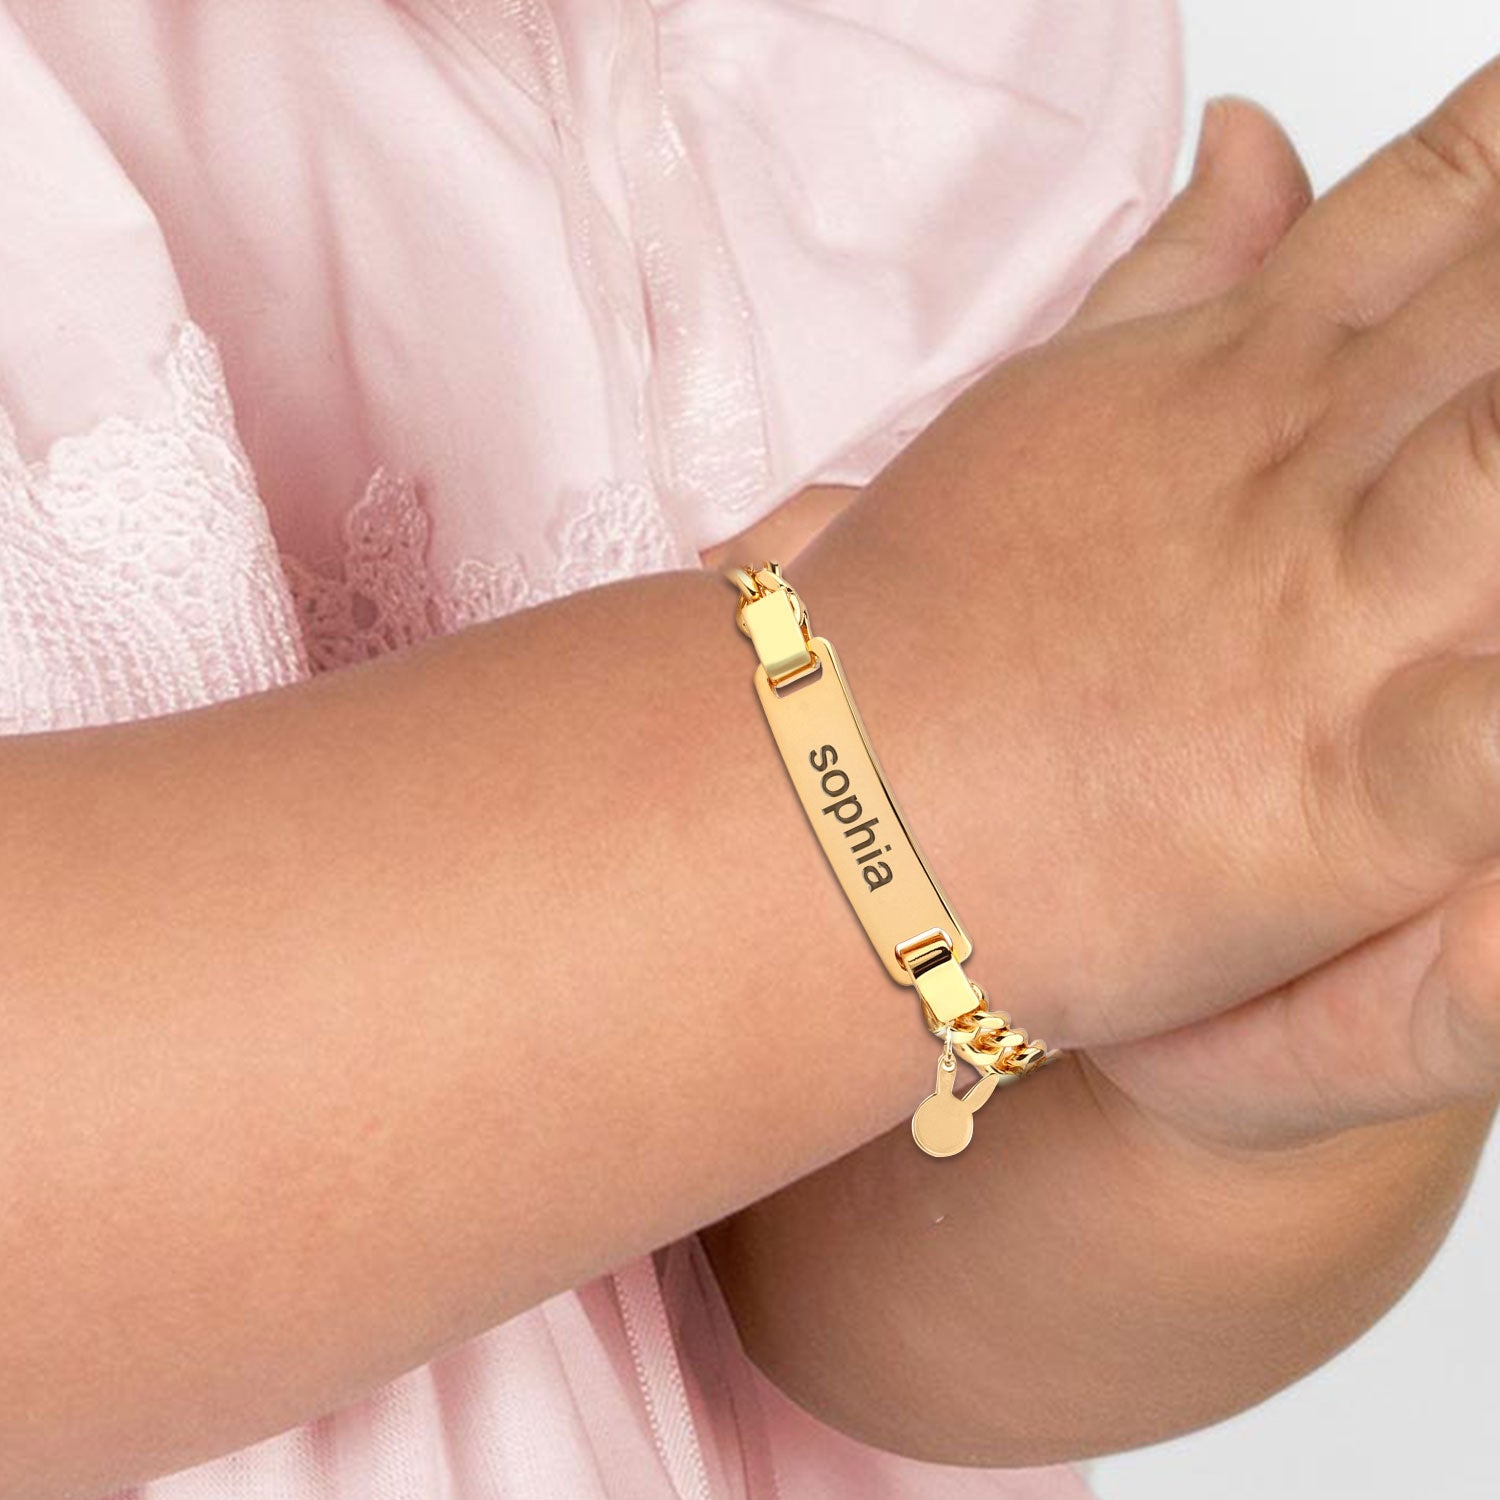 Baby Name Bracelet with Charm